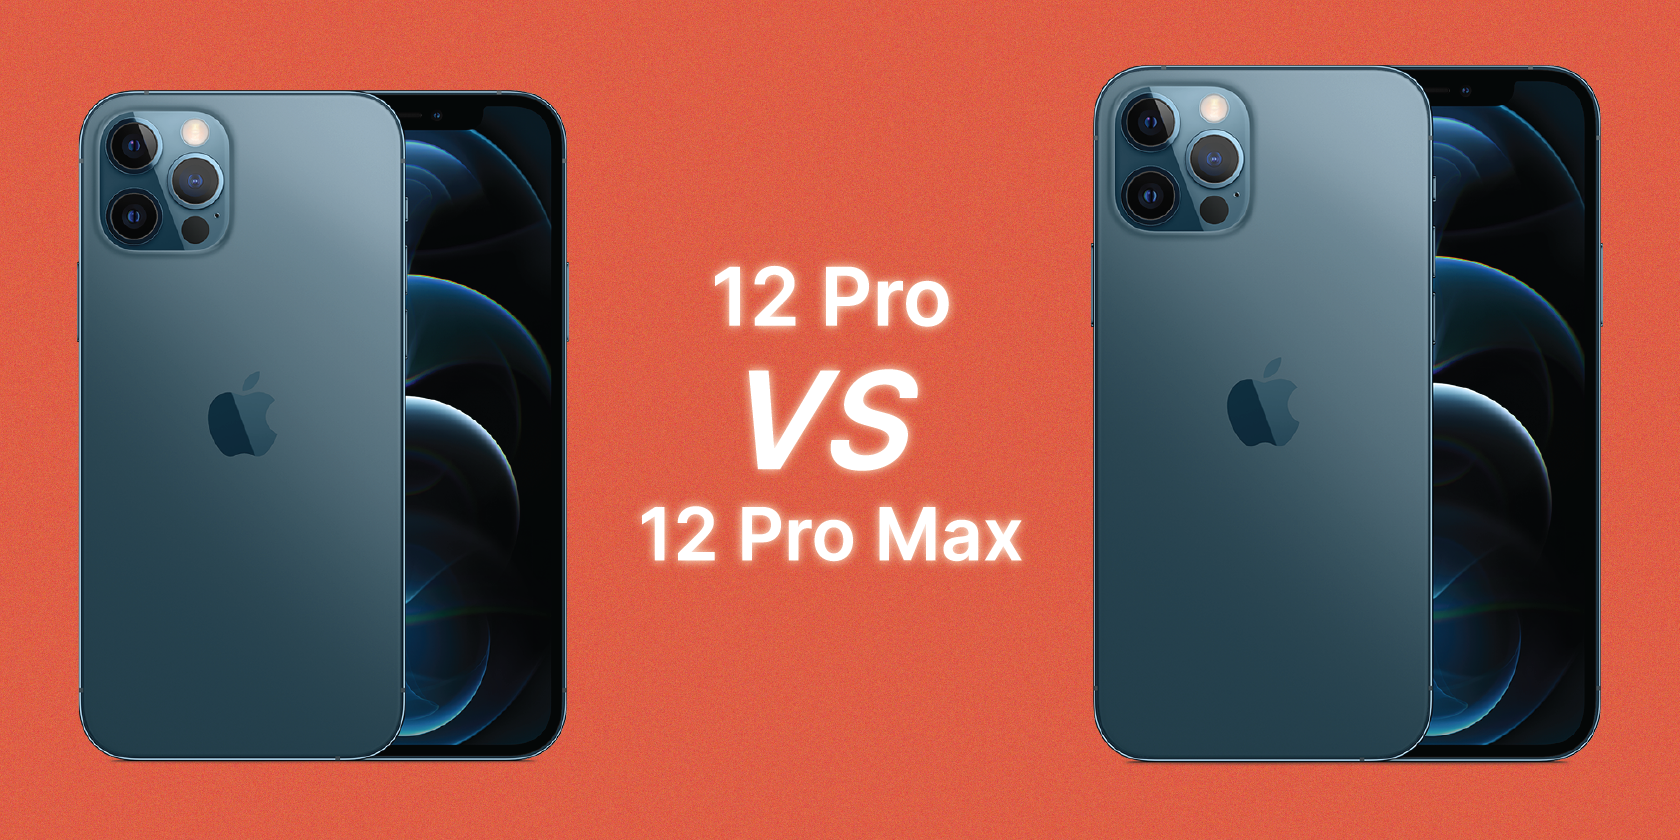 iPhone 12 Pro vs. iPhone 12 Pro Max: Which Should You Buy?